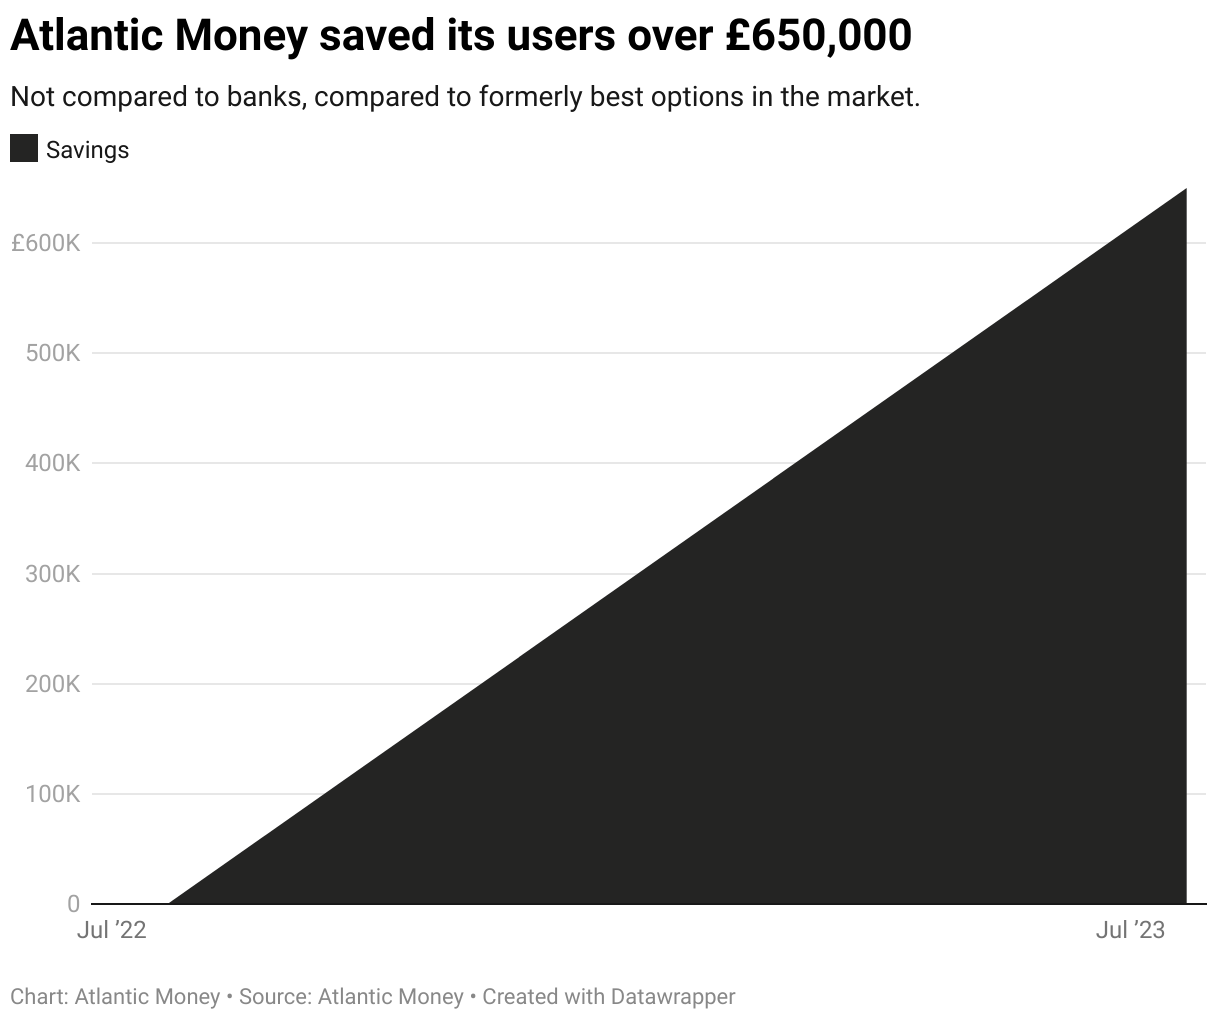 Graph shows an area chart between July 22 and July 23 demonstrating the savings over £650,000 Atlantic Money created compared against the cheapest options on the market.